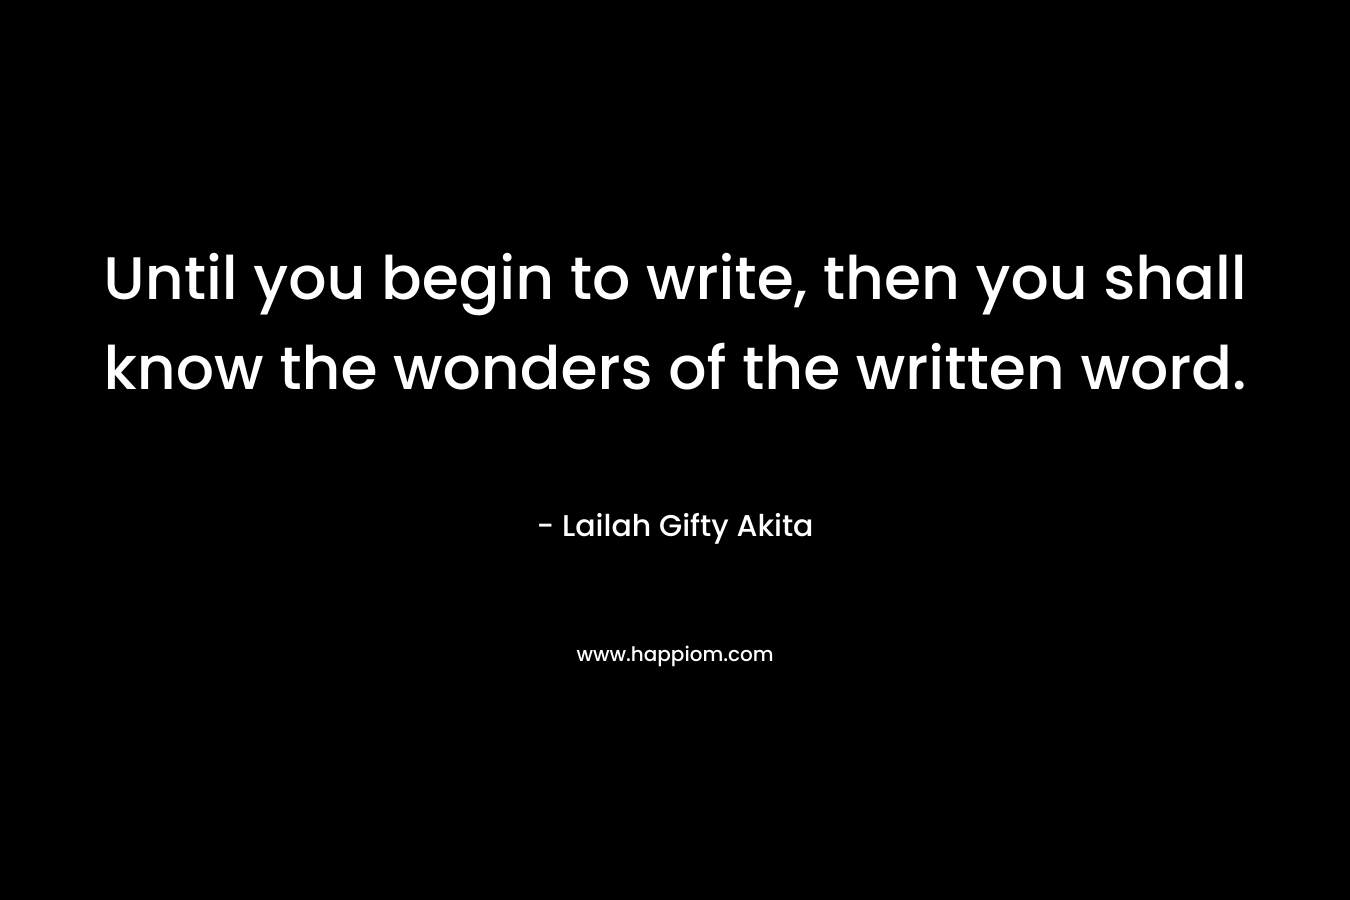 Until you begin to write, then you shall know the wonders of the written word. – Lailah Gifty Akita